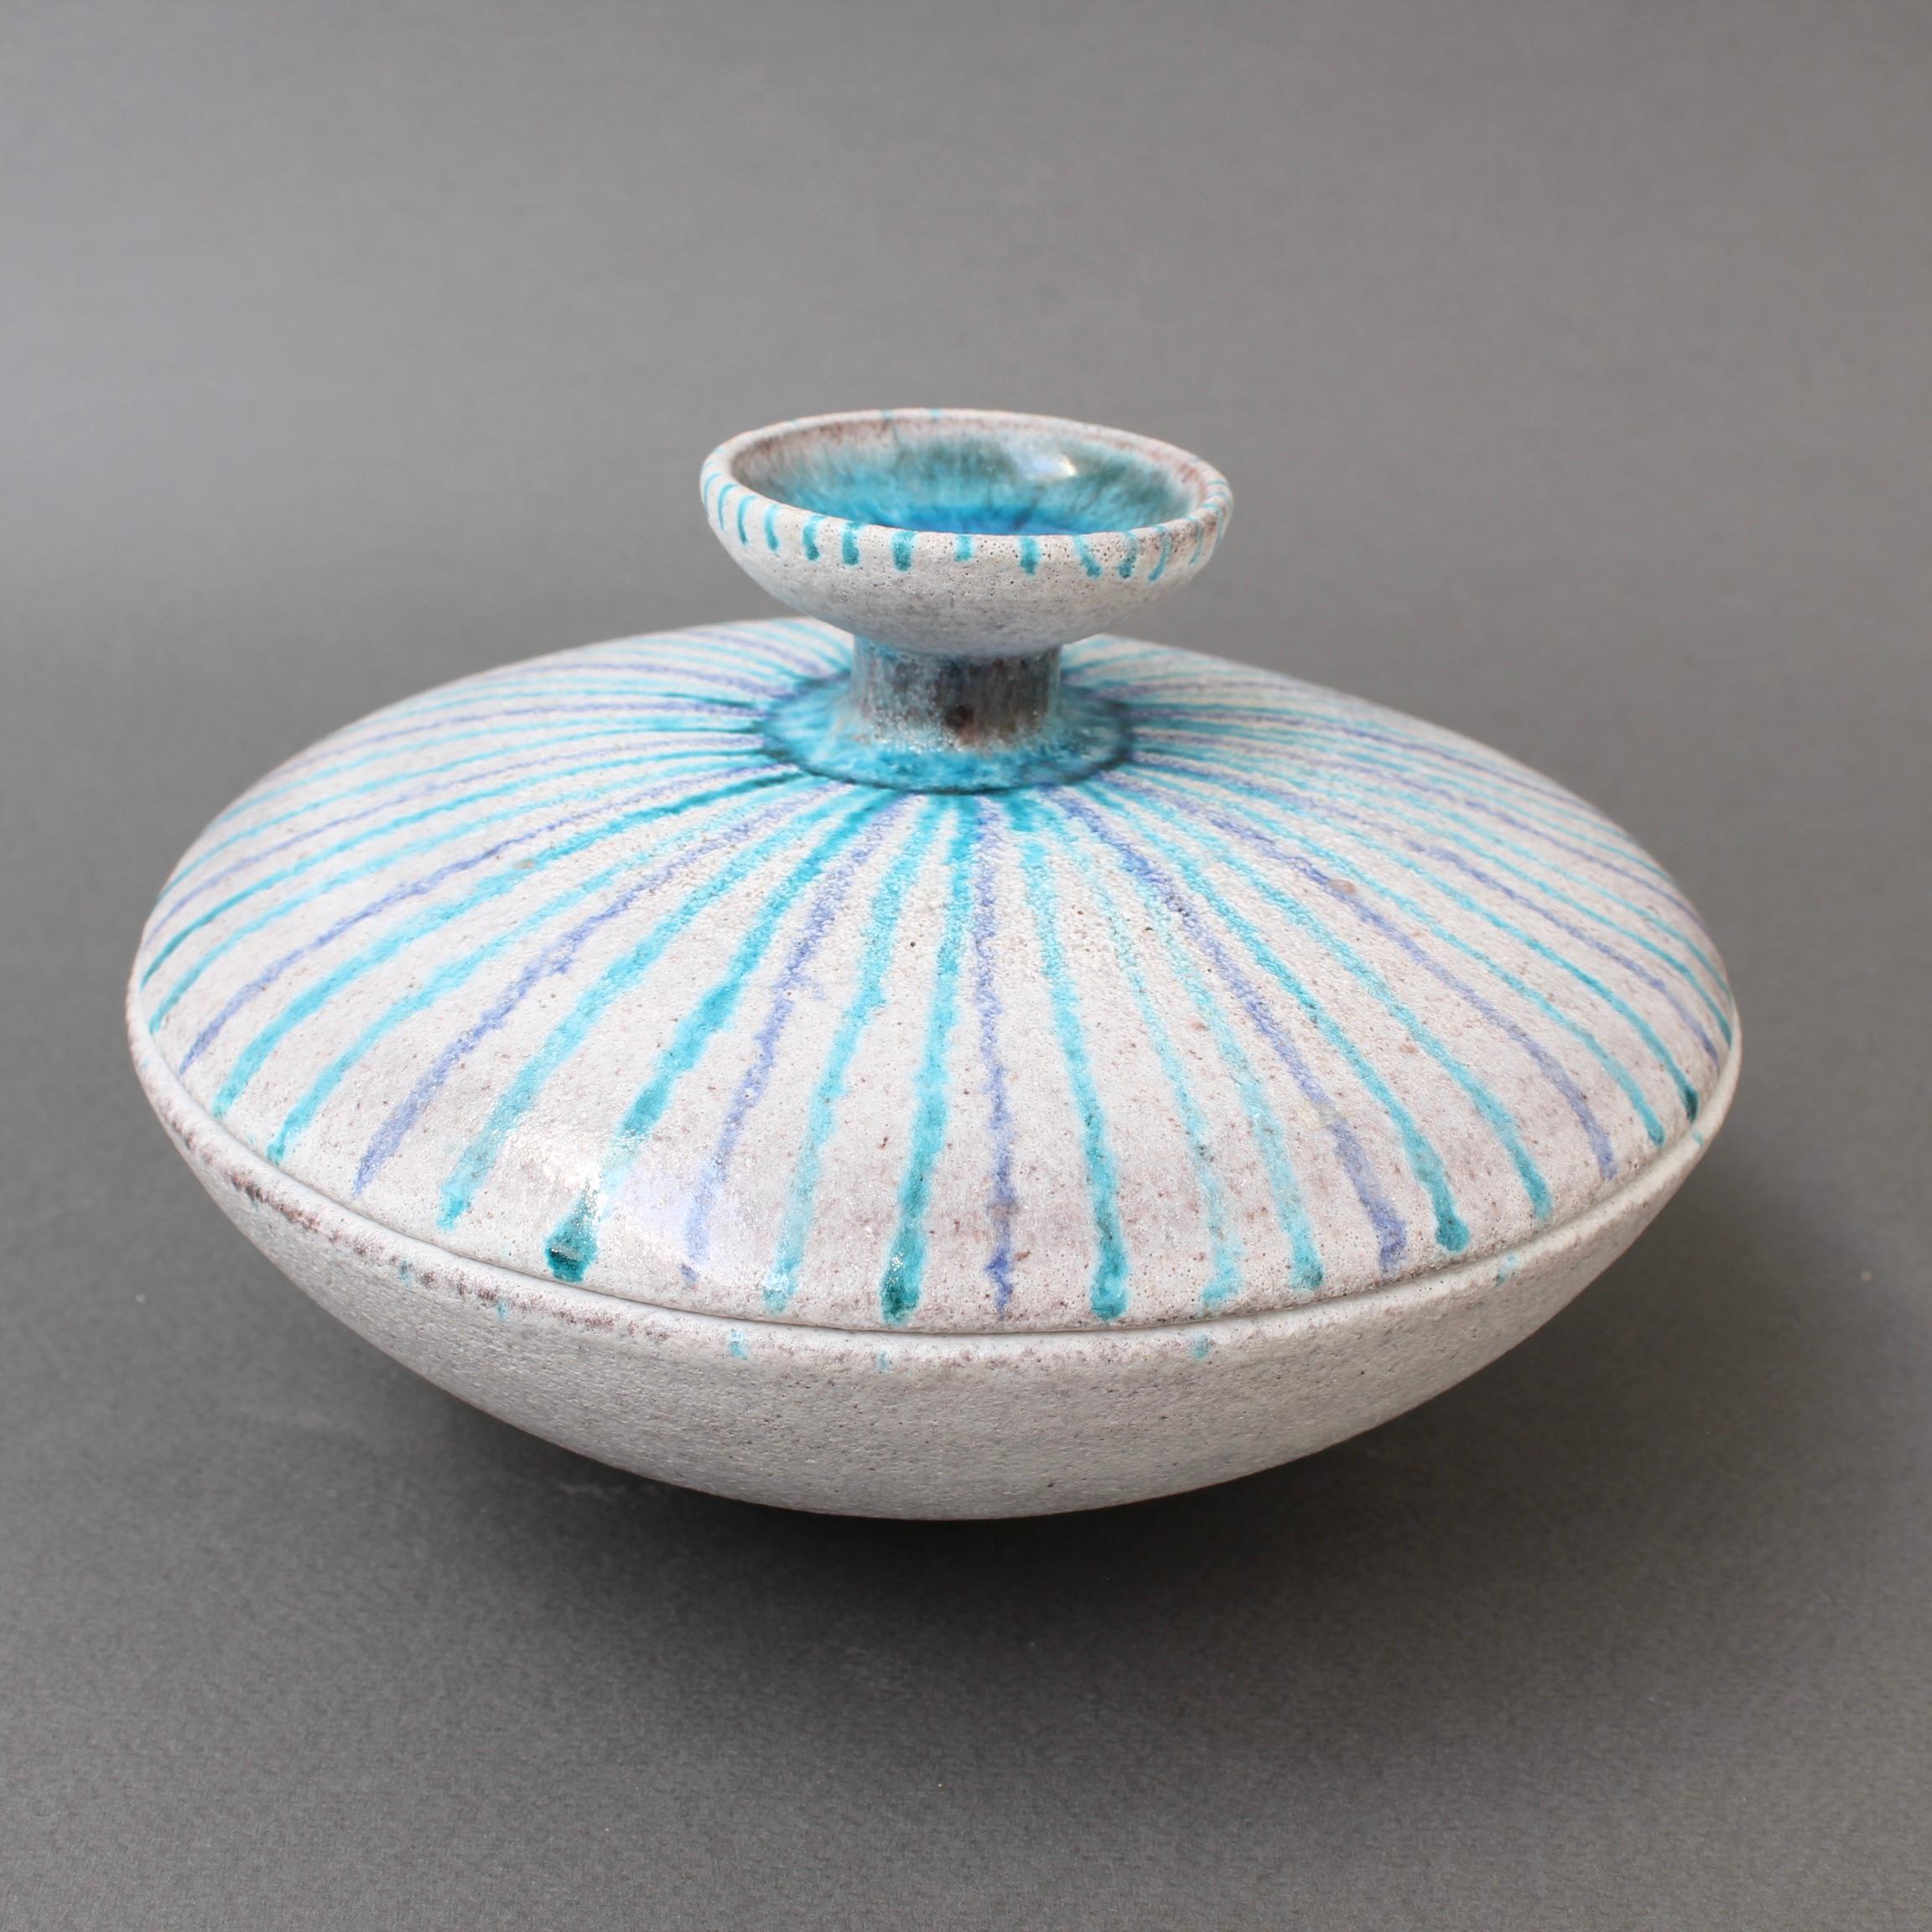 Vintage Italian decorative ceramic candy dish by Guido Gambone (circa 1950s). A flying saucer shaped dish with cover is painted with alternating blue and turquoise stripes emanating from the top centre handle, itself fashioned in the form of a